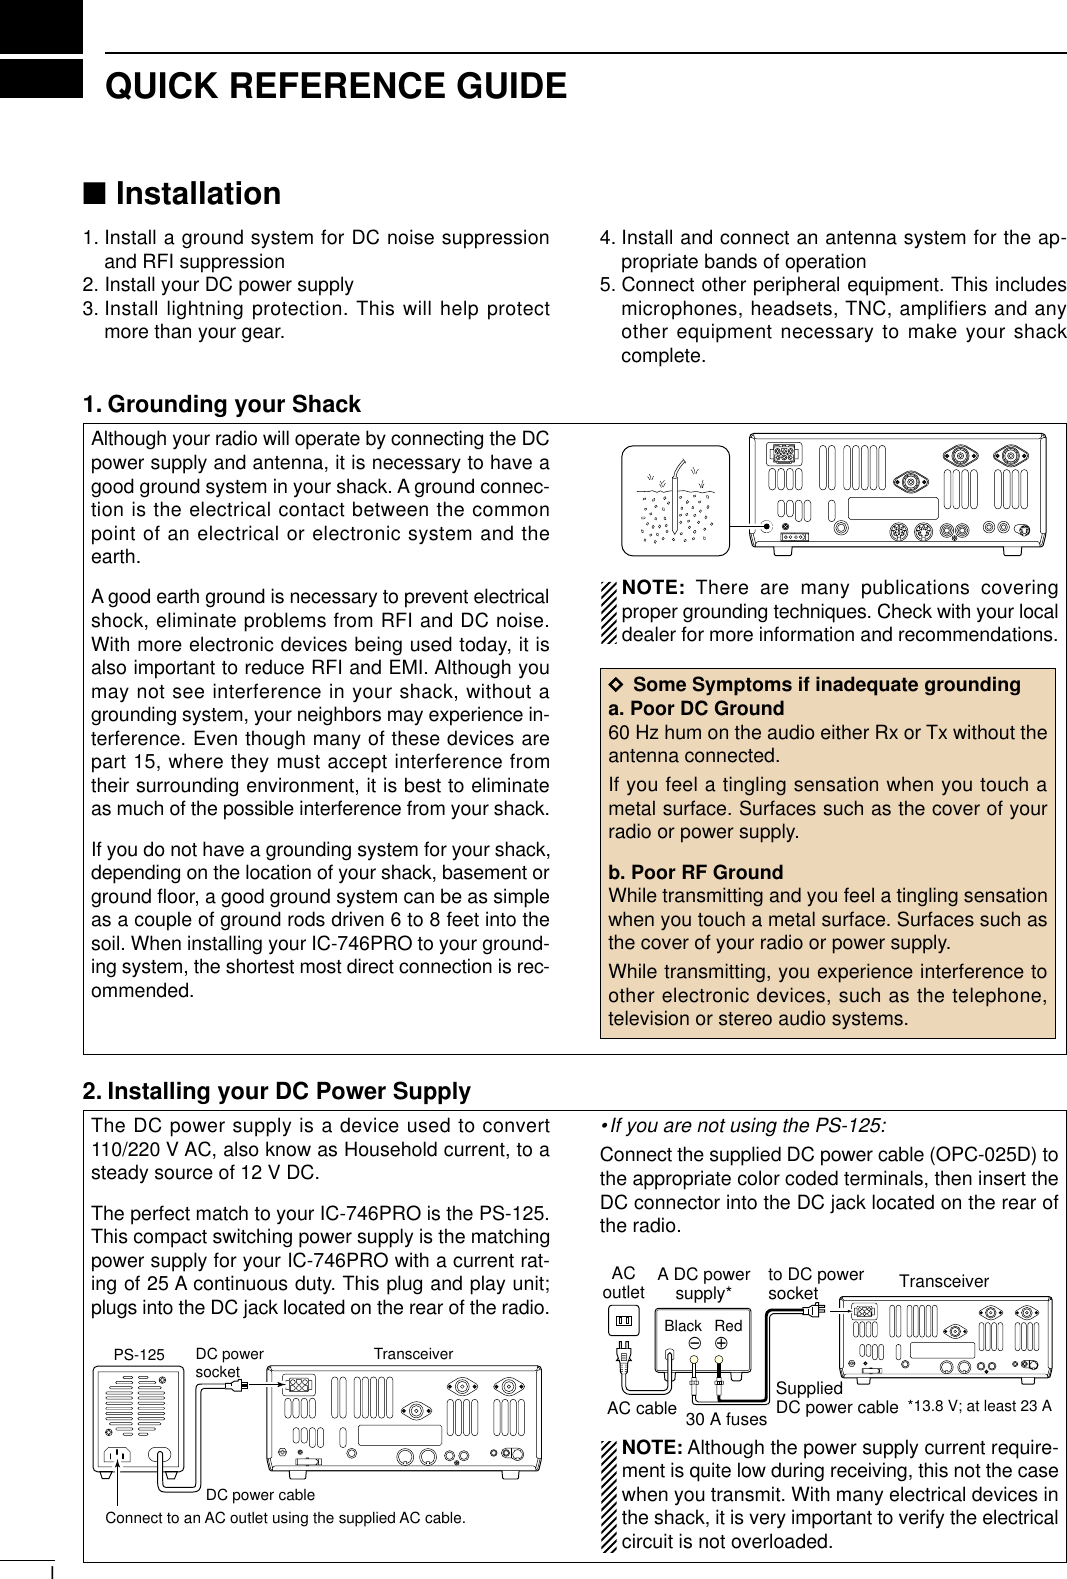 IQUICK REFERENCE GUIDE■Installation1. Install a ground system for DC noise suppressionand RFI suppression2. Install your DC power supply3. Install lightning protection. This will help protectmore than your gear.4. Install and connect an antenna system for the ap-propriate bands of operation5. Connect other peripheral equipment. This includesmicrophones, headsets, TNC, amplifiers and anyother equipment necessary to make your shackcomplete.Although your radio will operate by connecting the DCpower supply and antenna, it is necessary to have agood ground system in your shack. A ground connec-tion is the electrical contact between the commonpoint of an electrical or electronic system and theearth. A good earth ground is necessary to prevent electricalshock, eliminate problems from RFI and DC noise.With more electronic devices being used today, it isalso important to reduce RFI and EMI. Although youmay not see interference in your shack, without agrounding system, your neighbors may experience in-terference. Even though many of these devices arepart 15, where they must accept interference fromtheir surrounding environment, it is best to eliminateas much of the possible interference from your shack. If you do not have a grounding system for your shack,depending on the location of your shack, basement orground ﬂoor, a good ground system can be as simpleas a couple of ground rods driven 6 to 8 feet into thesoil. When installing your IC-746PRO to your ground-ing system, the shortest most direct connection is rec-ommended. NOTE: There are many publications coveringproper grounding techniques. Check with your localdealer for more information and recommendations.DSome Symptoms if inadequate groundinga. Poor DC Ground60 Hz hum on the audio either Rx or Tx without theantenna connected.If you feel a tingling sensation when you touch ametal surface. Surfaces such as the cover of yourradio or power supply.b. Poor RF GroundWhile transmitting and you feel a tingling sensationwhen you touch a metal surface. Surfaces such asthe cover of your radio or power supply.While transmitting, you experience interference toother electronic devices, such as the telephone,television or stereo audio systems. The DC power supply is a device used to convert110/220 V AC, also know as Household current, to asteady source of 12 V DC. The perfect match to your IC-746PRO is the PS-125.This compact switching power supply is the matchingpower supply for your IC-746PRO with a current rat-ing of 25 A continuous duty. This plug and play unit;plugs into the DC jack located on the rear of the radio.•If you are not using the PS-125:Connect the supplied DC power cable (OPC-025D) tothe appropriate color coded terminals, then insert theDC connector into the DC jack located on the rear ofthe radio.NOTE: Although the power supply current require-ment is quite low during receiving, this not the casewhen you transmit. With many electrical devices inthe shack, it is very important to verify the electricalcircuit is not overloaded.30 A fusesAC cableTransceiverACoutlet A DC powersupply**13.8 V; at least 23 ABlack_Red+to DC powersocketSuppliedDC power cablePS-125 DC powersocket TransceiverDC power cableConnect to an AC outlet using the supplied AC cable.1. Grounding your Shack2. Installing your DC Power Supply